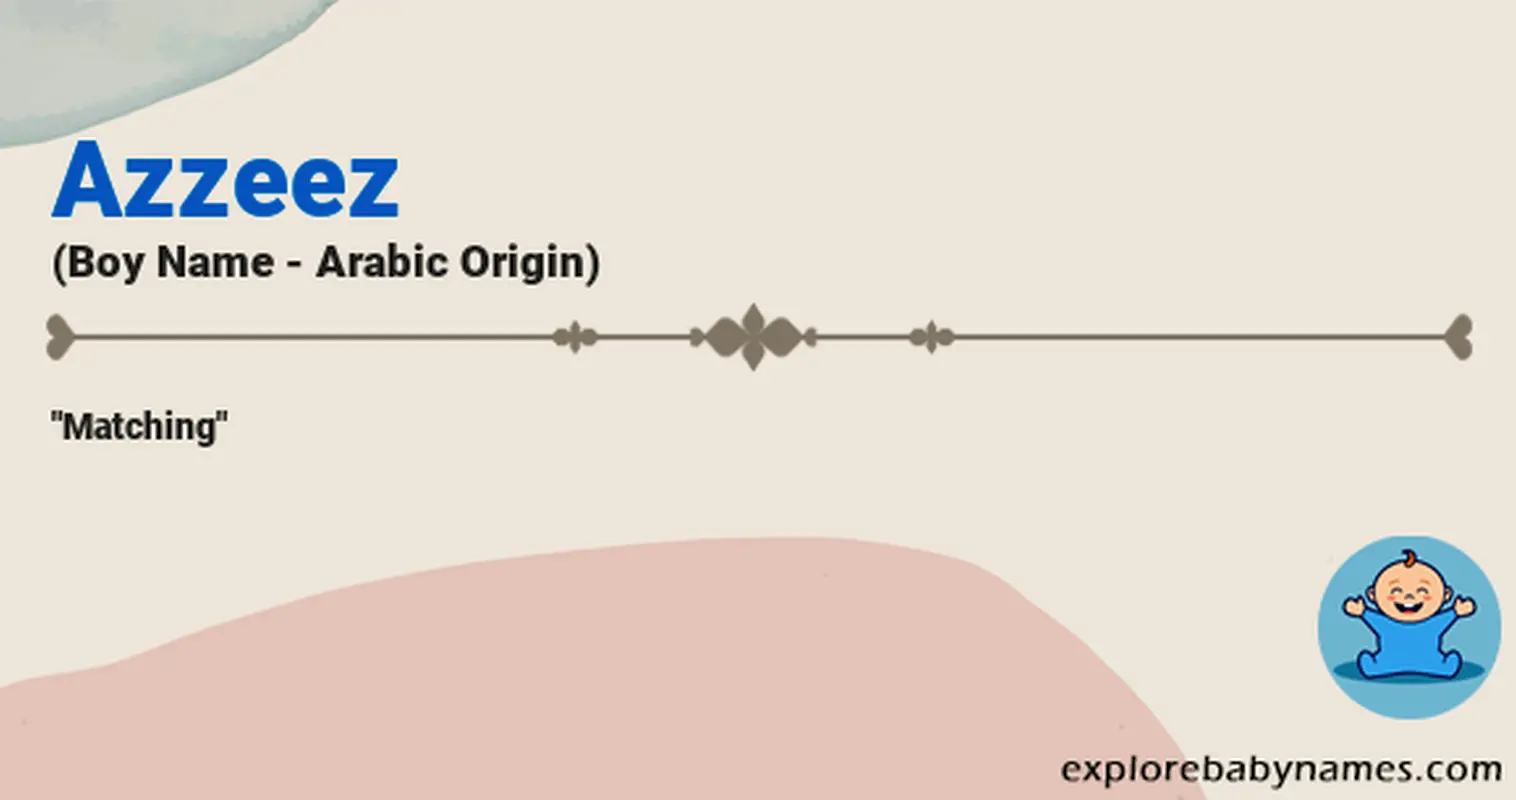 Meaning of Azzeez